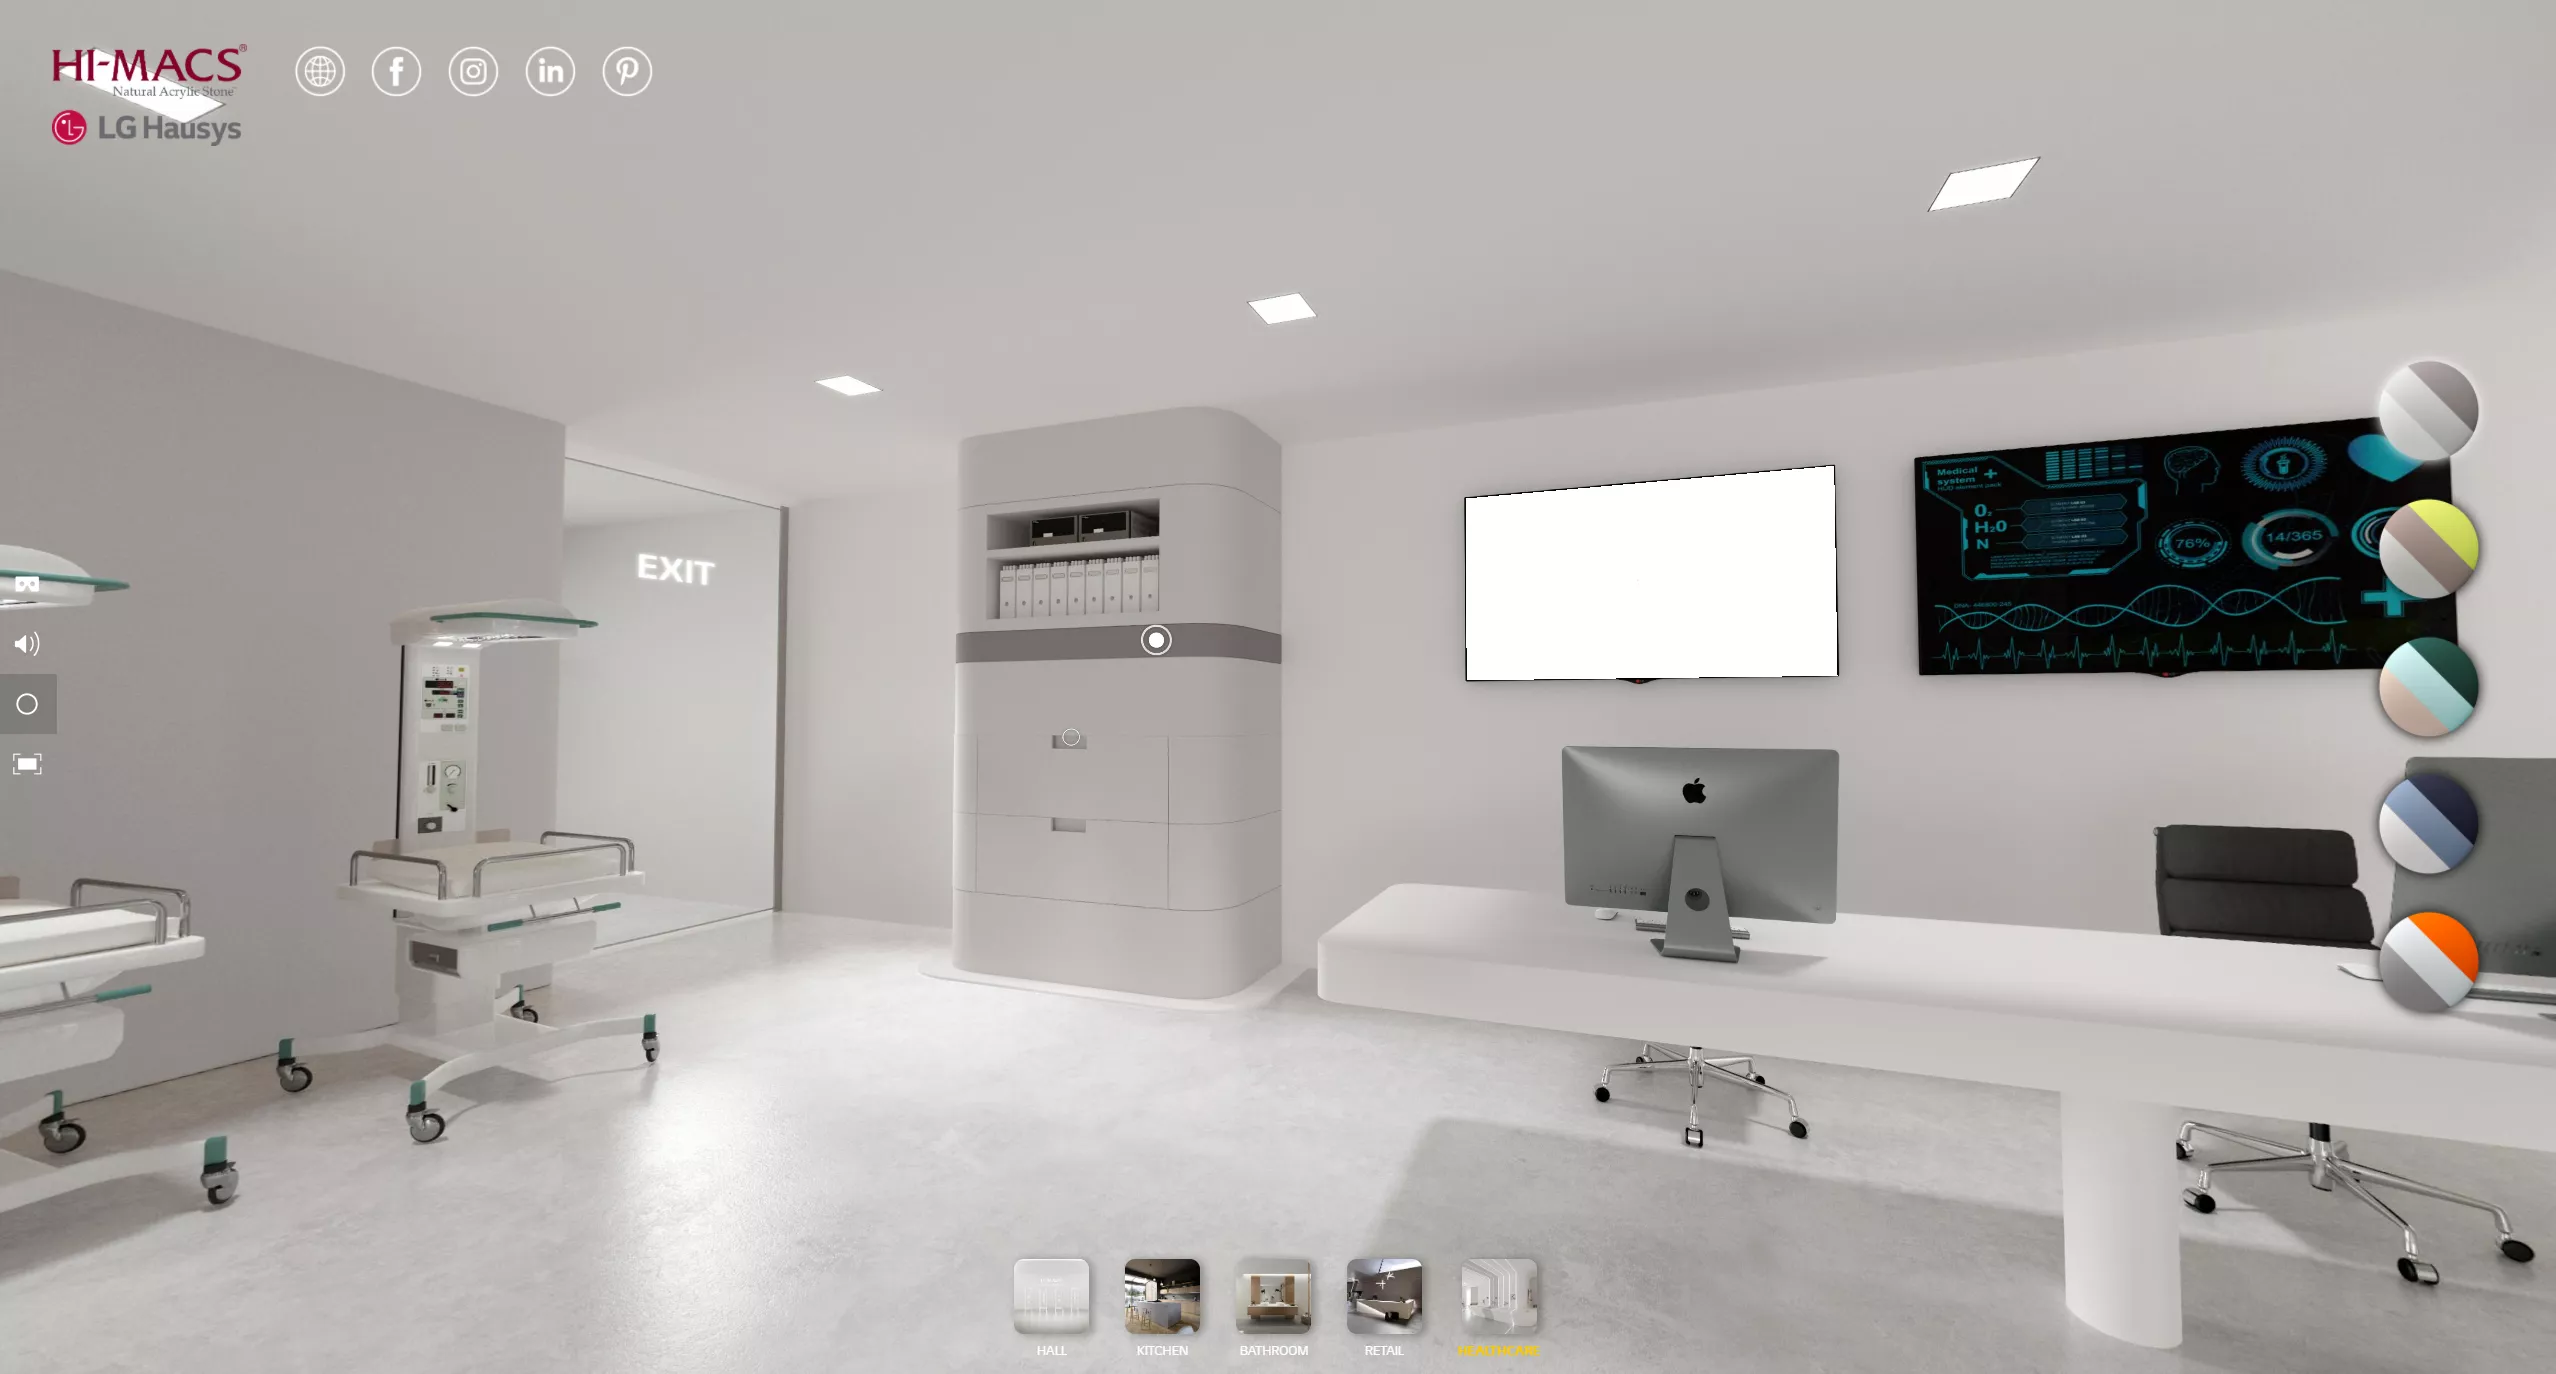 HIMACS launches brand new interactive virtual showroom